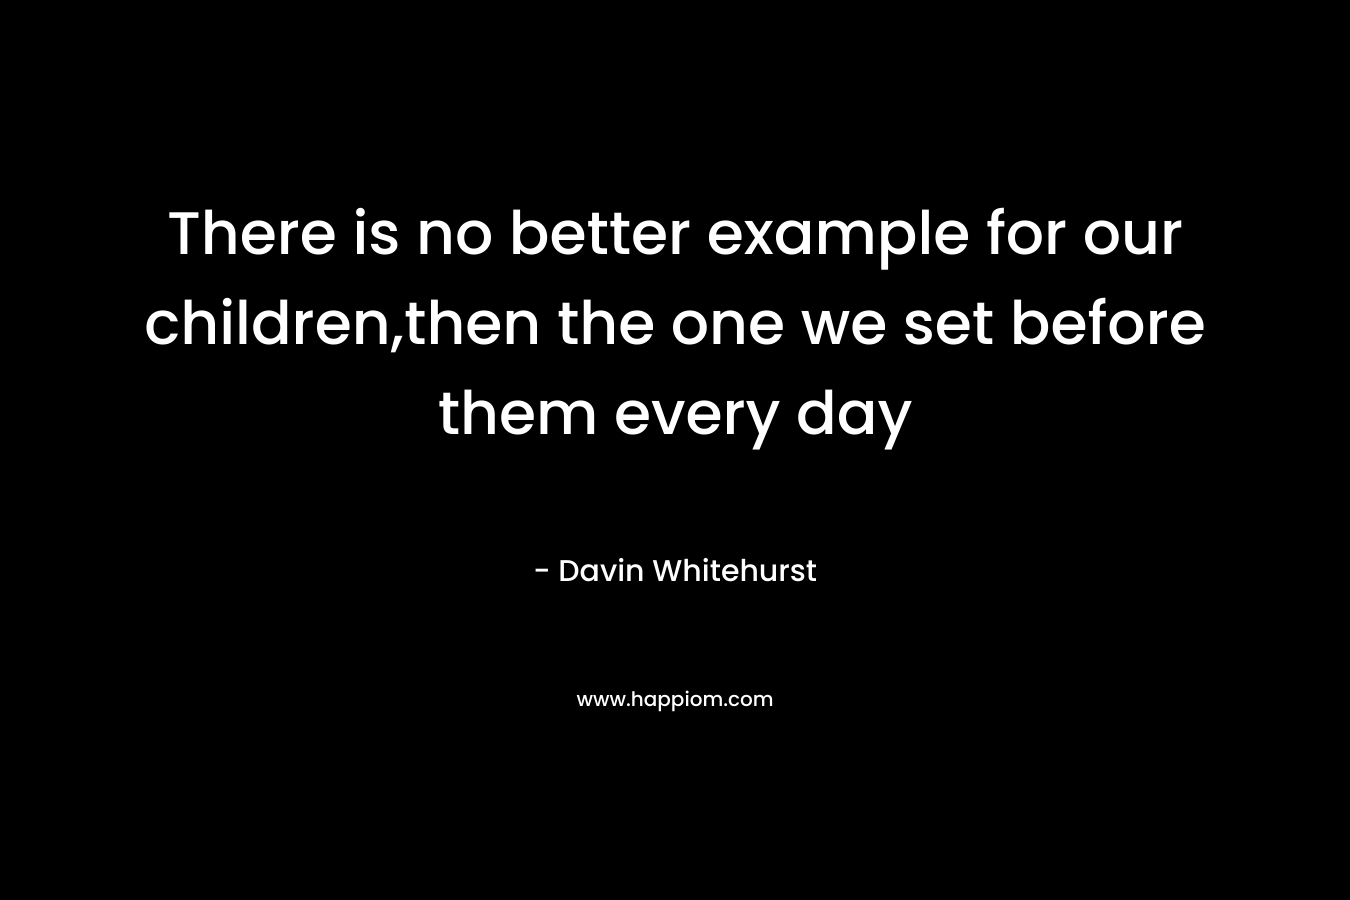 There is no better example for our children,then the one we set before them every day – Davin Whitehurst